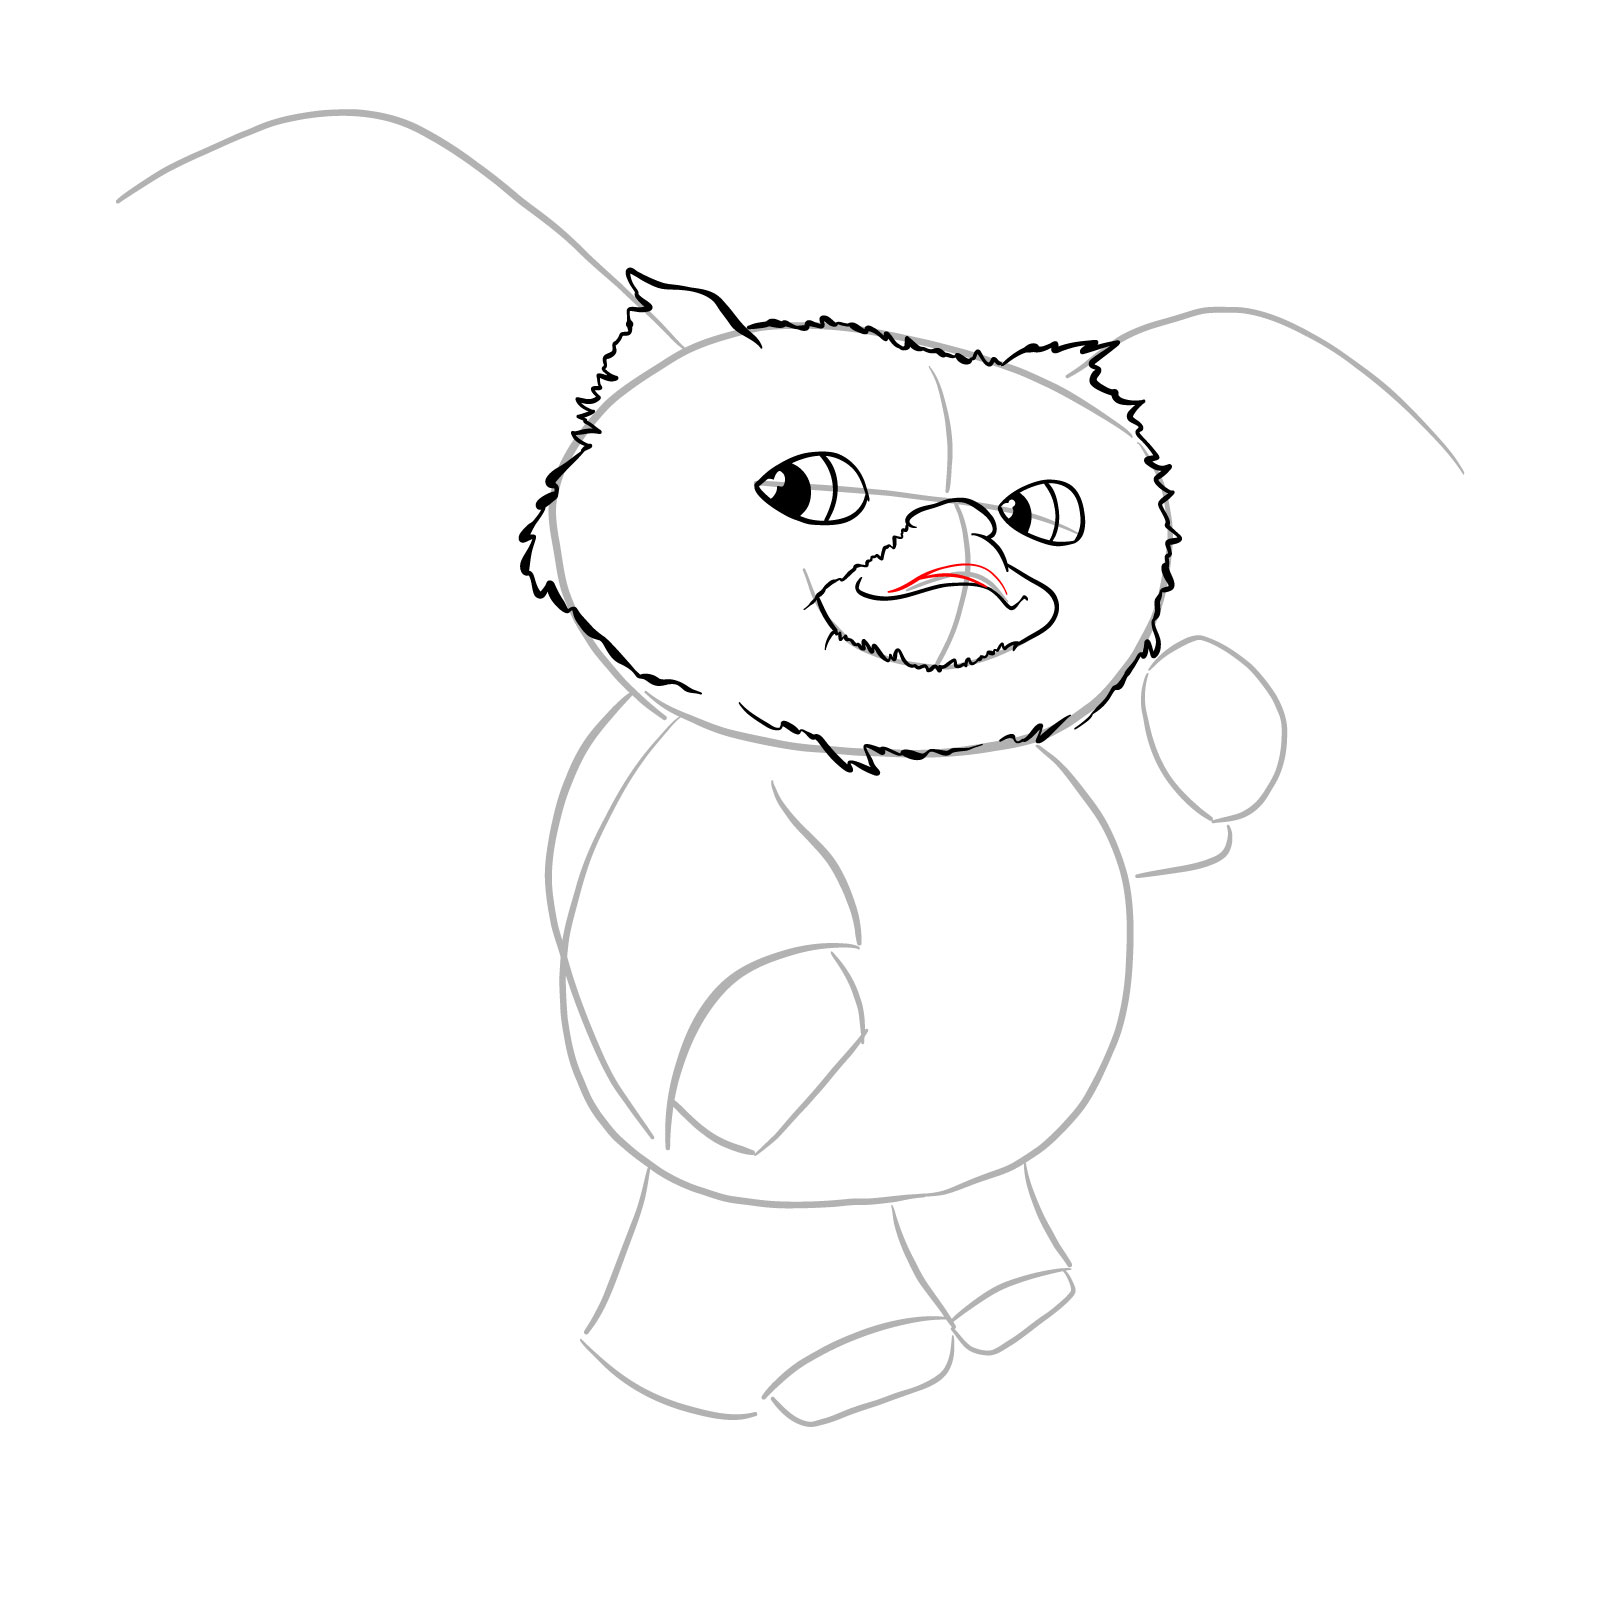 How to draw a Gremlin - step 12